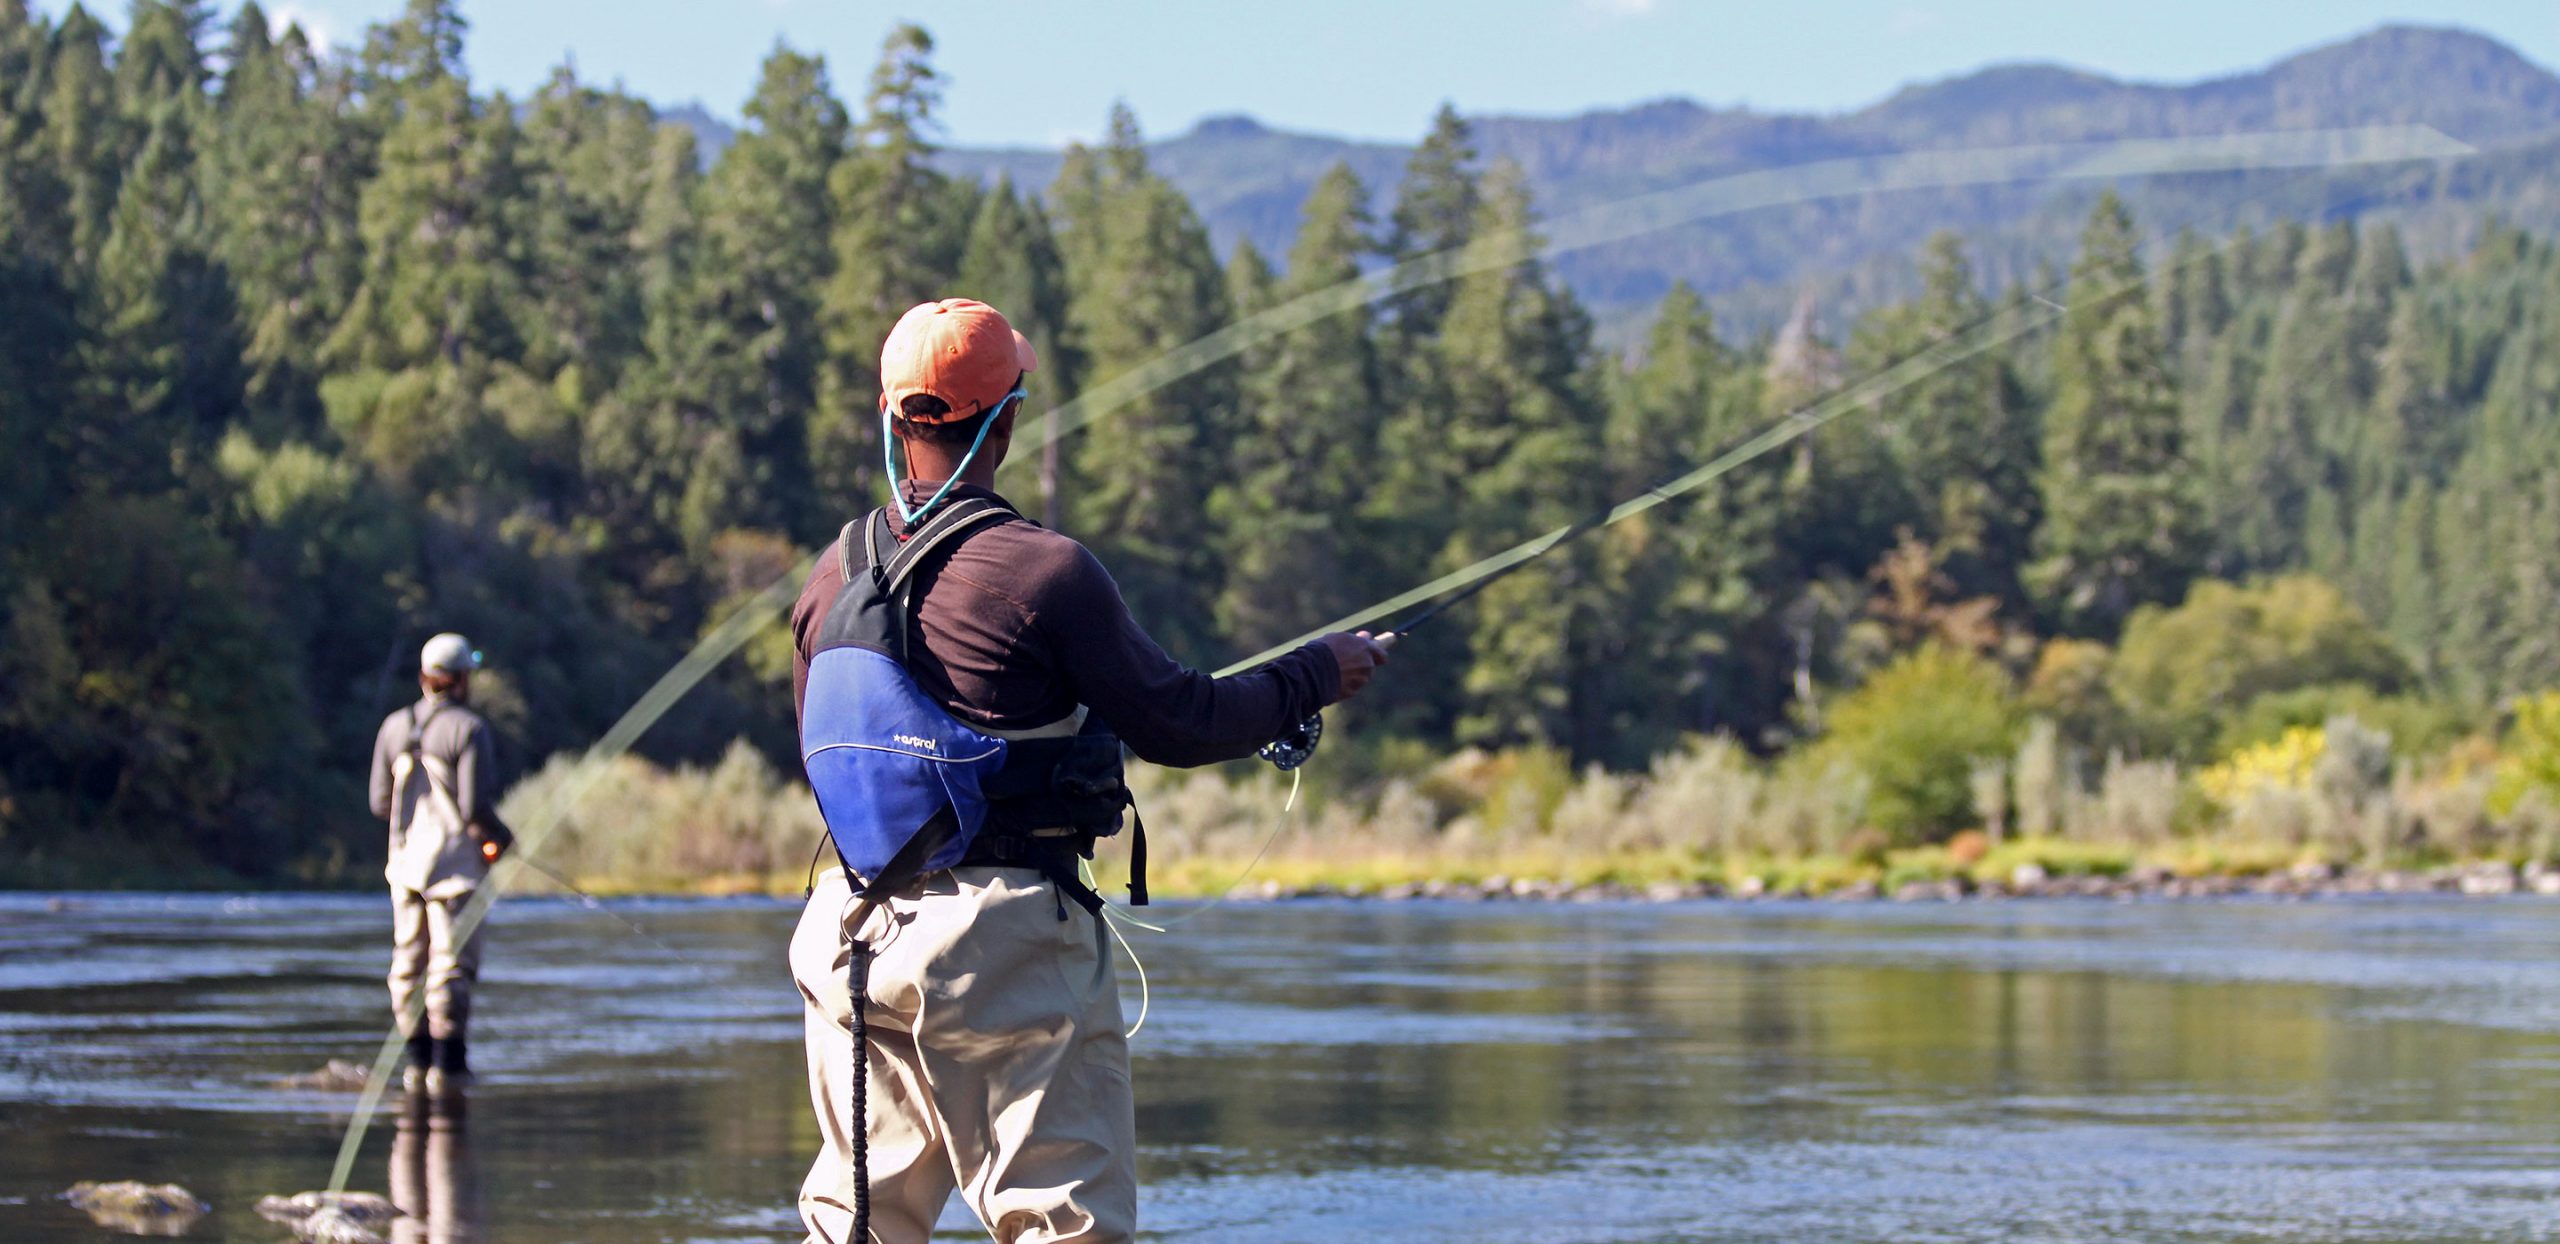 Upper Colorado River Fly Fishing, Camping, Boating - AllTrips